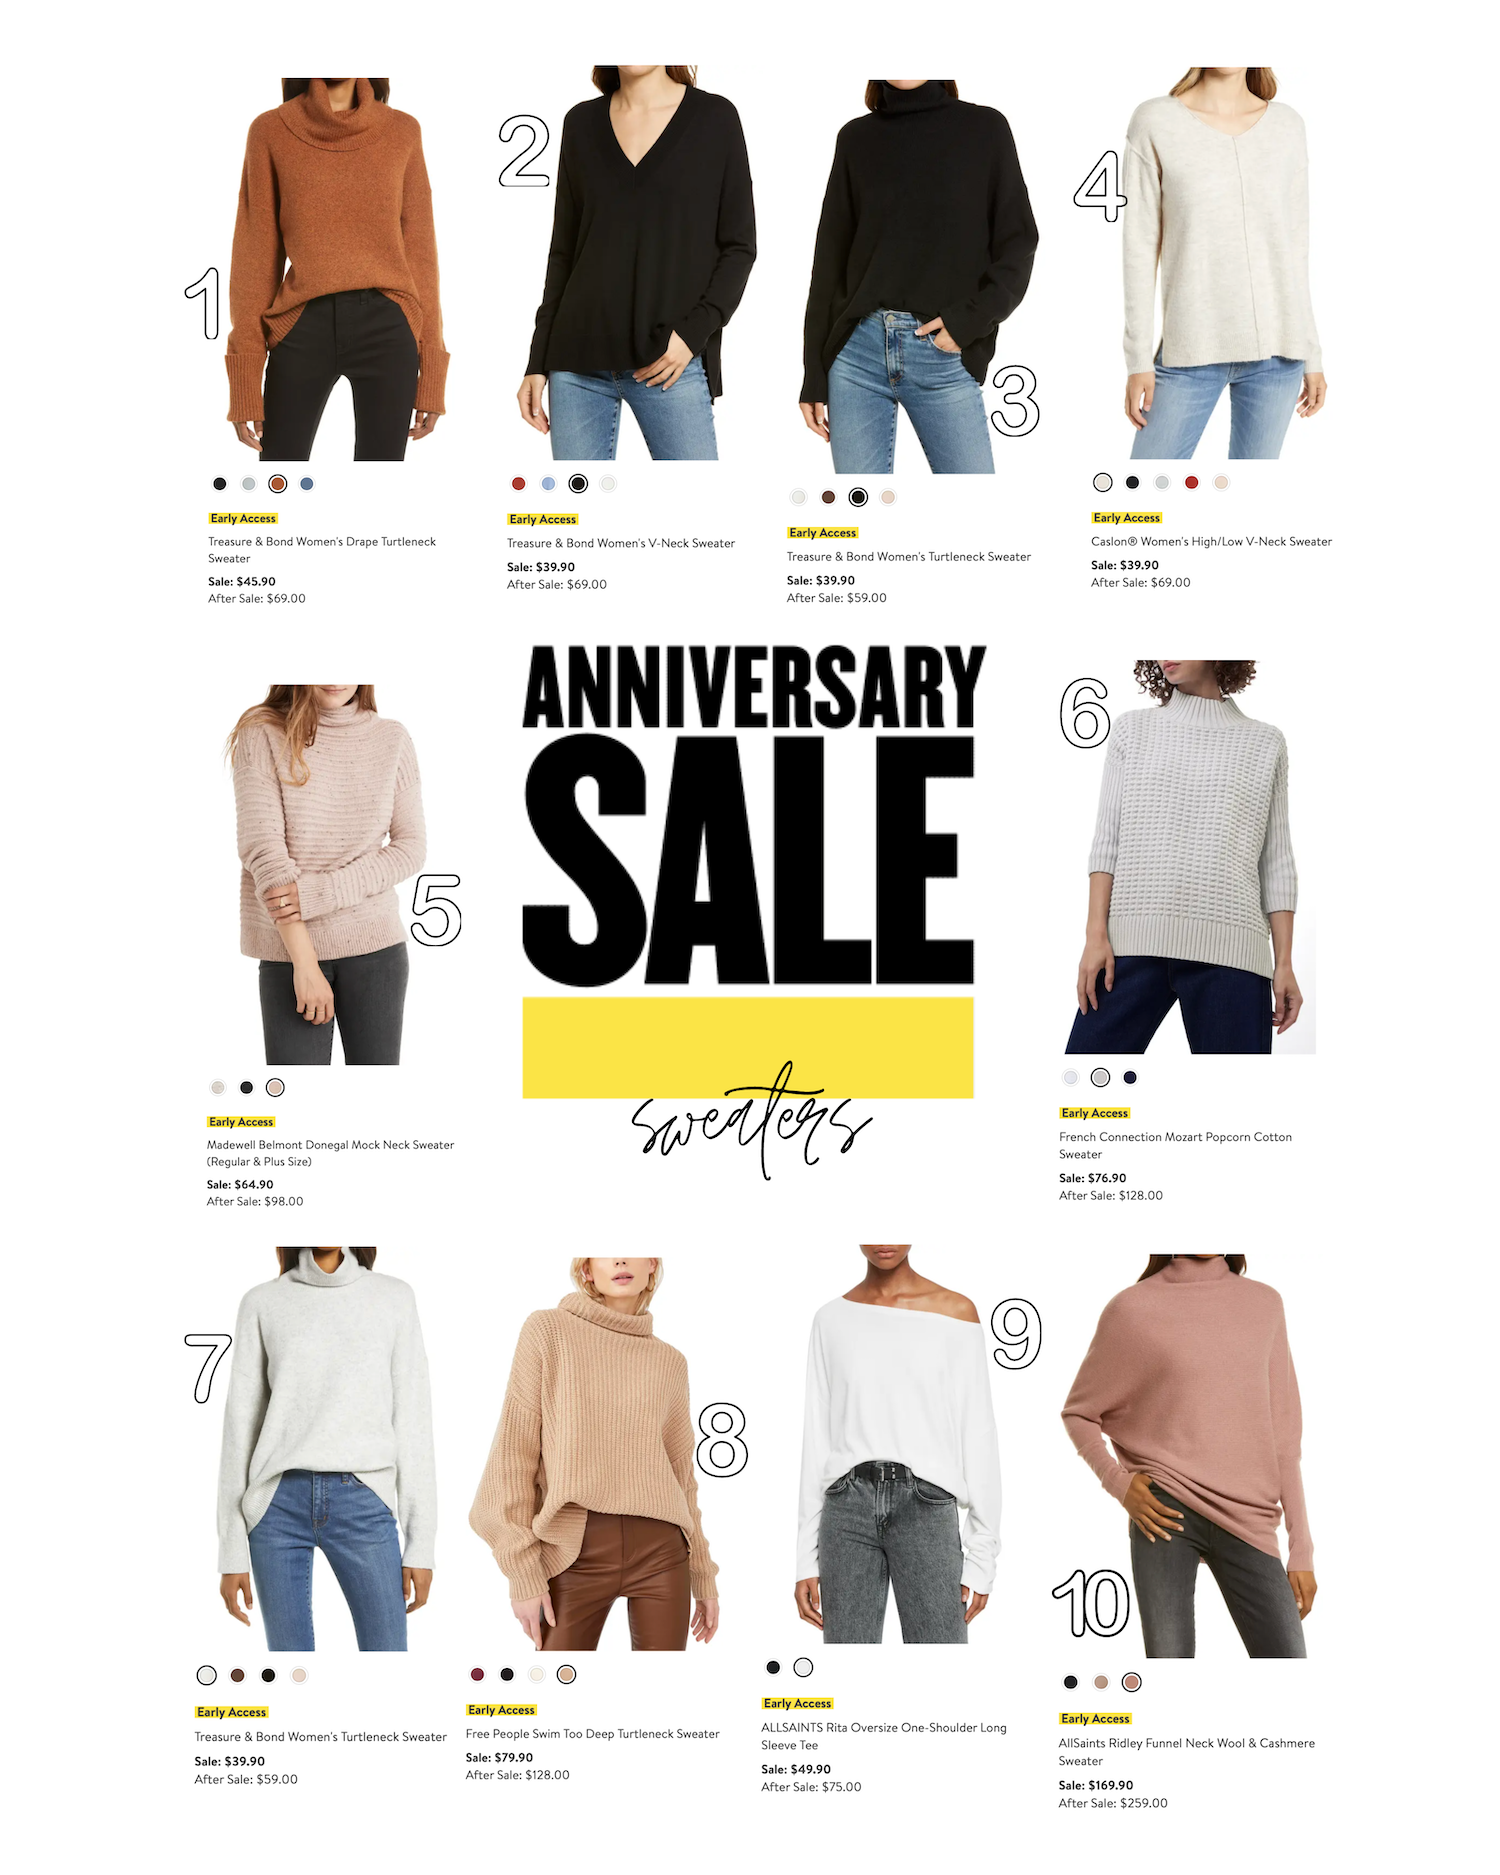 Nordstrom Sale 2021 Roundup The best sweaters daily dose of charm nsale Lauren Emily Lindmark